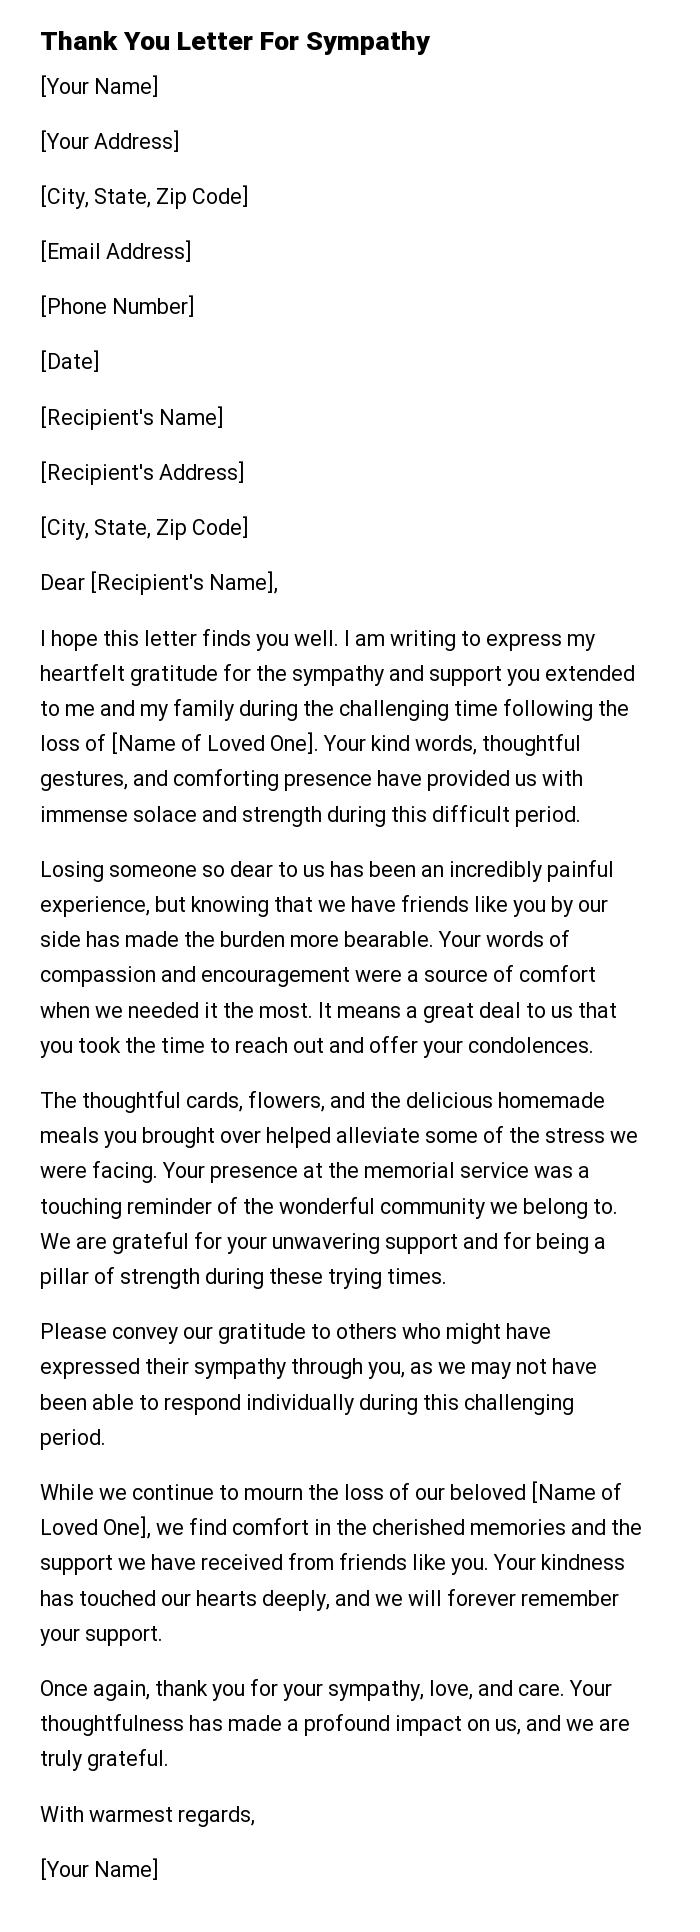 Thank You Letter For Sympathy